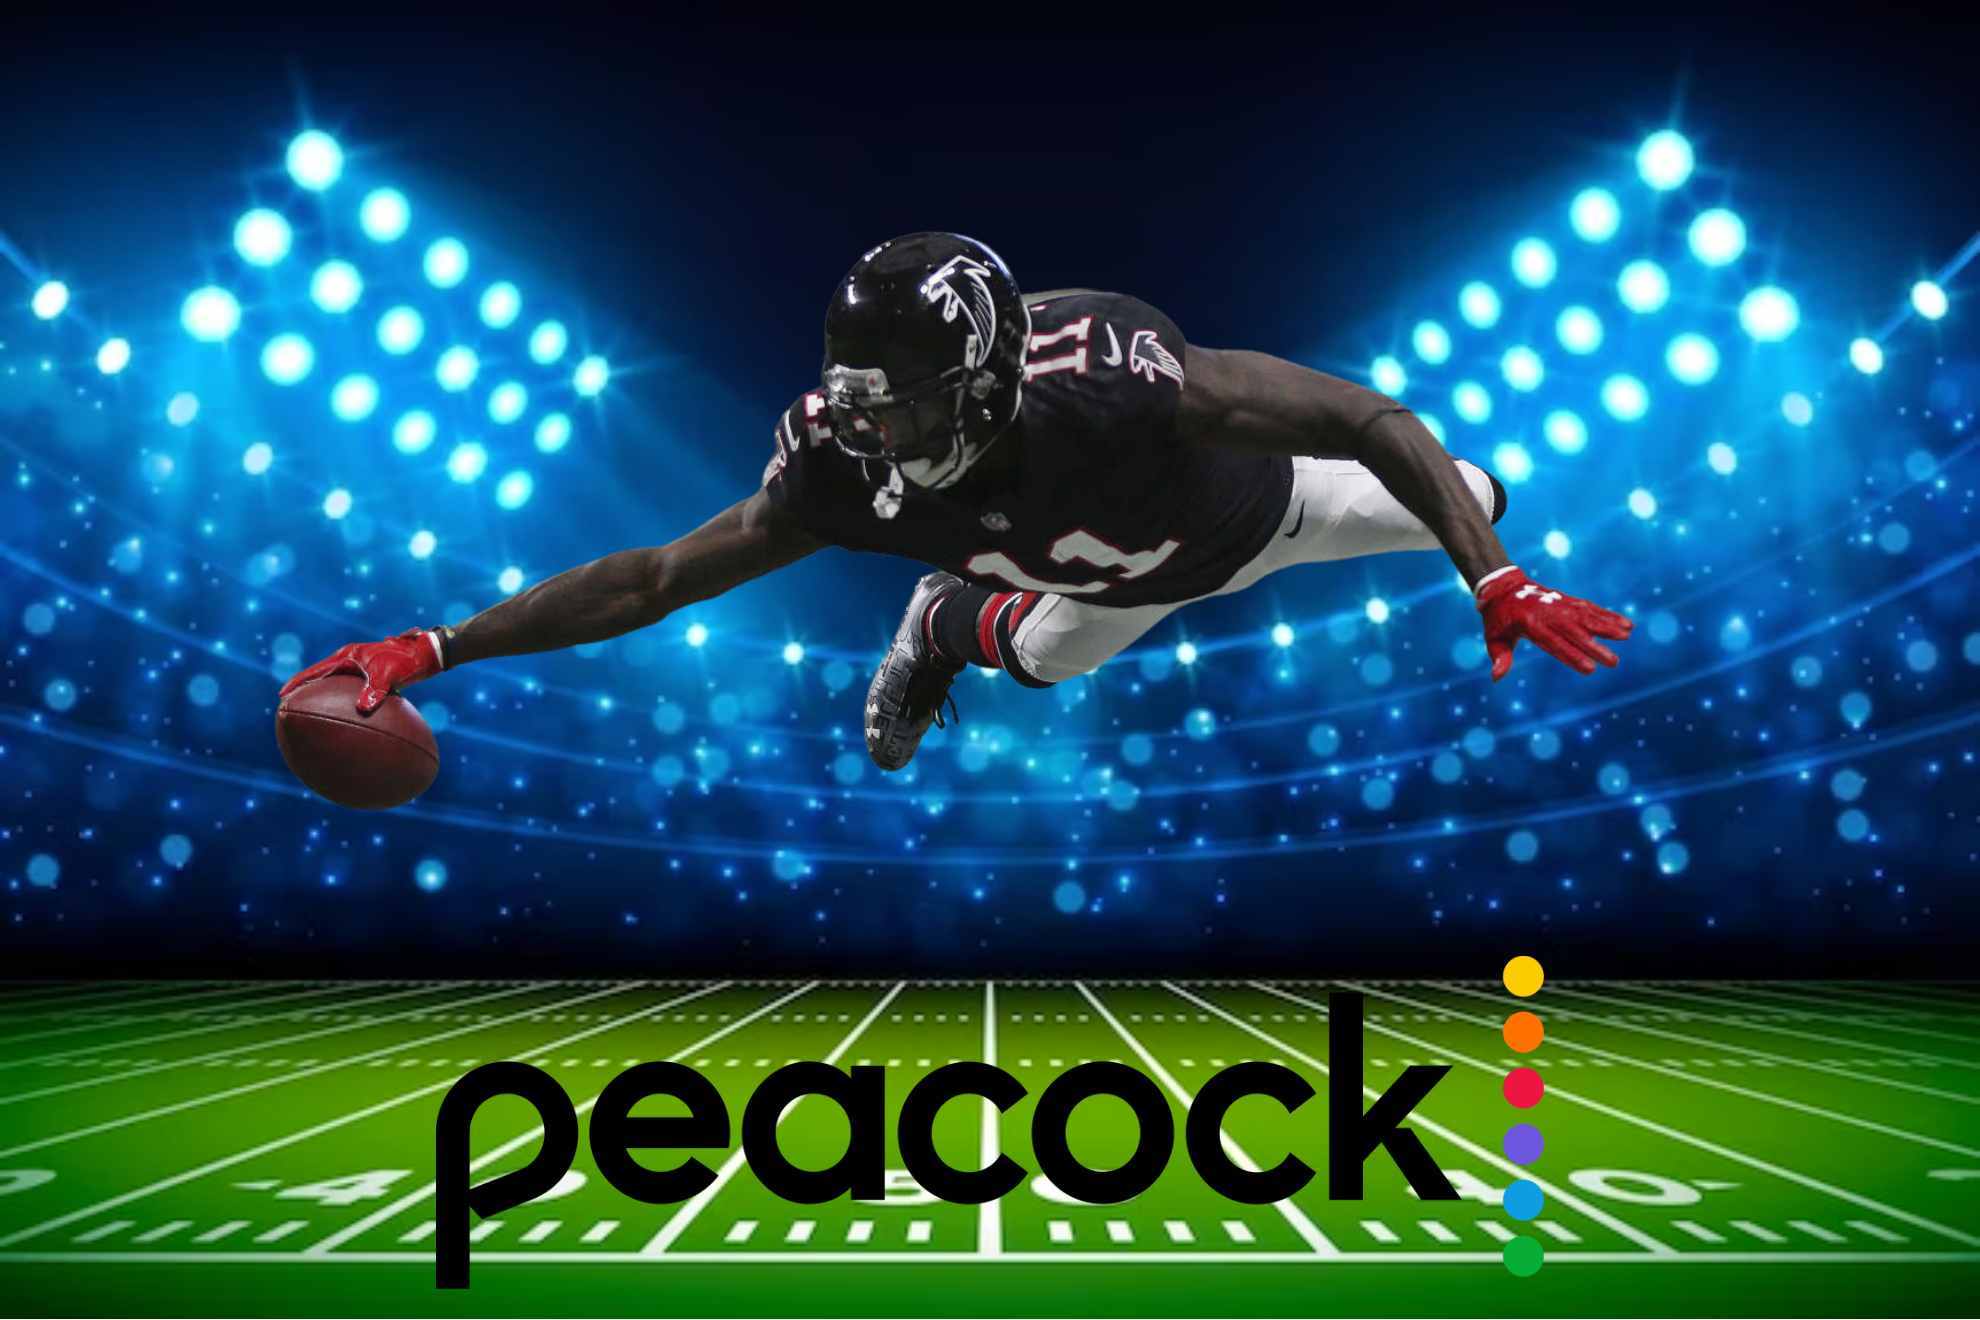 Peacock gets in on NFL: will be first streaming platform to air playoff game